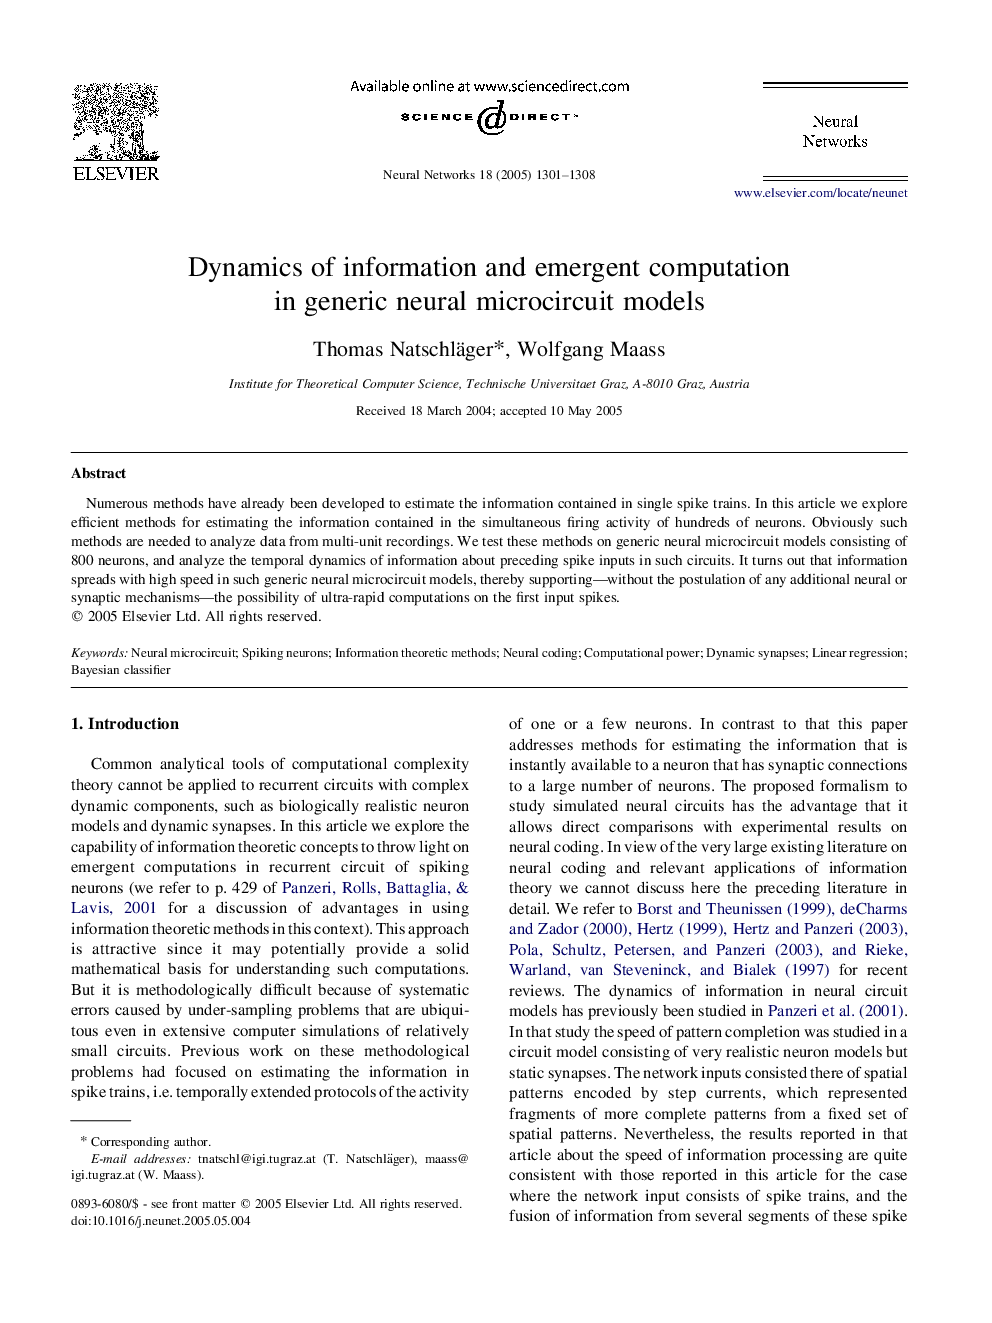 Dynamics of information and emergent computation in generic neural microcircuit models